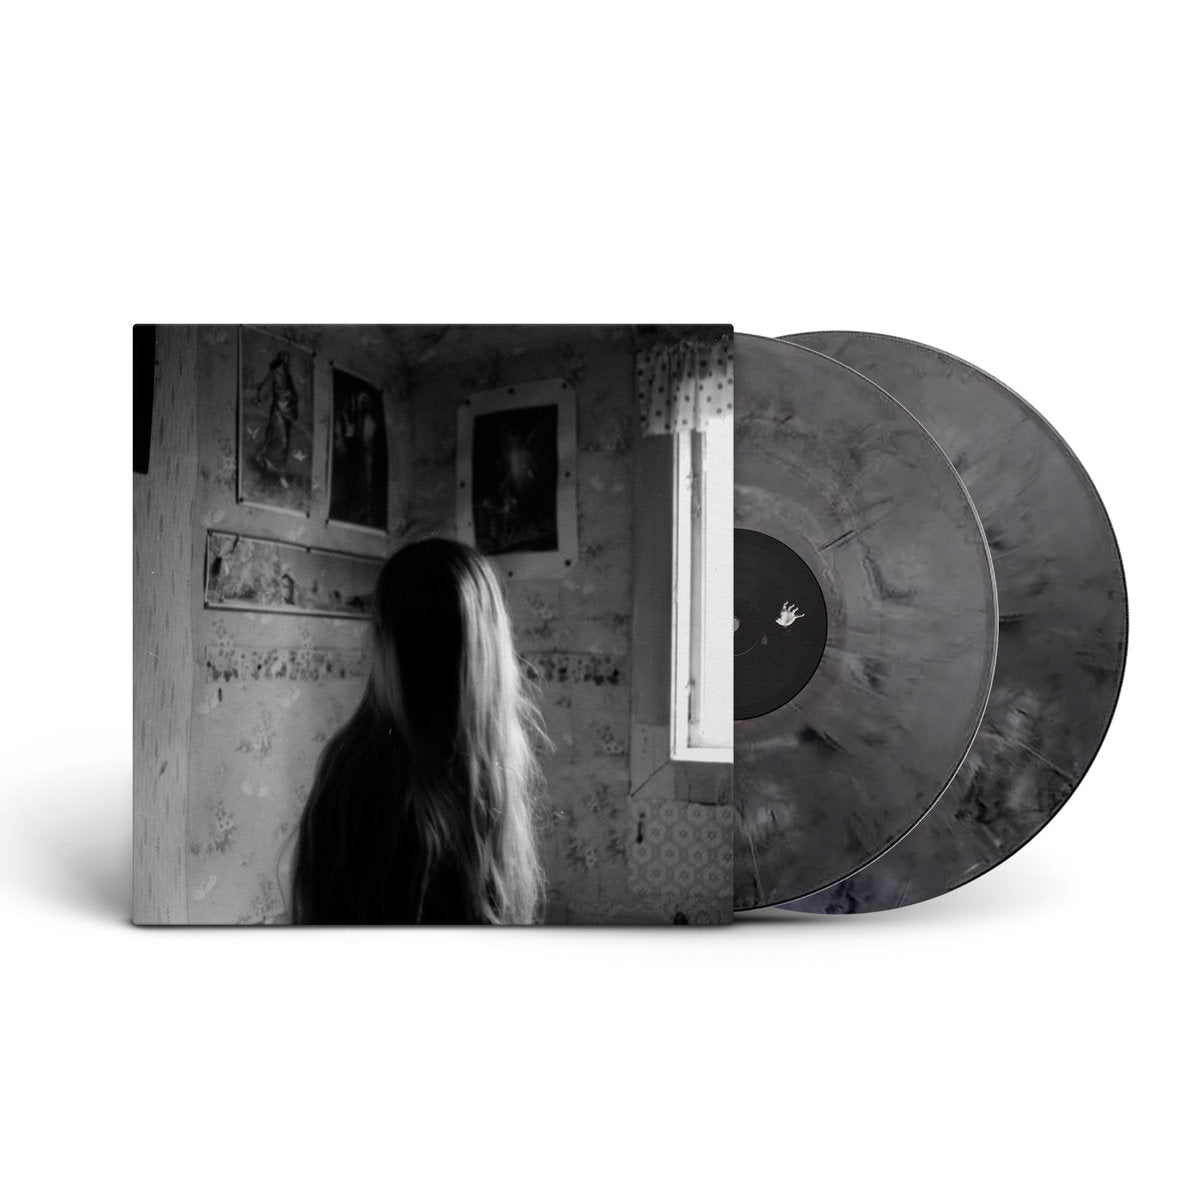 Anna Von Hausswolff - The Miraculous (Limited Edition of 1000 on Silver & Black Marble Double Vinyl + Etching)